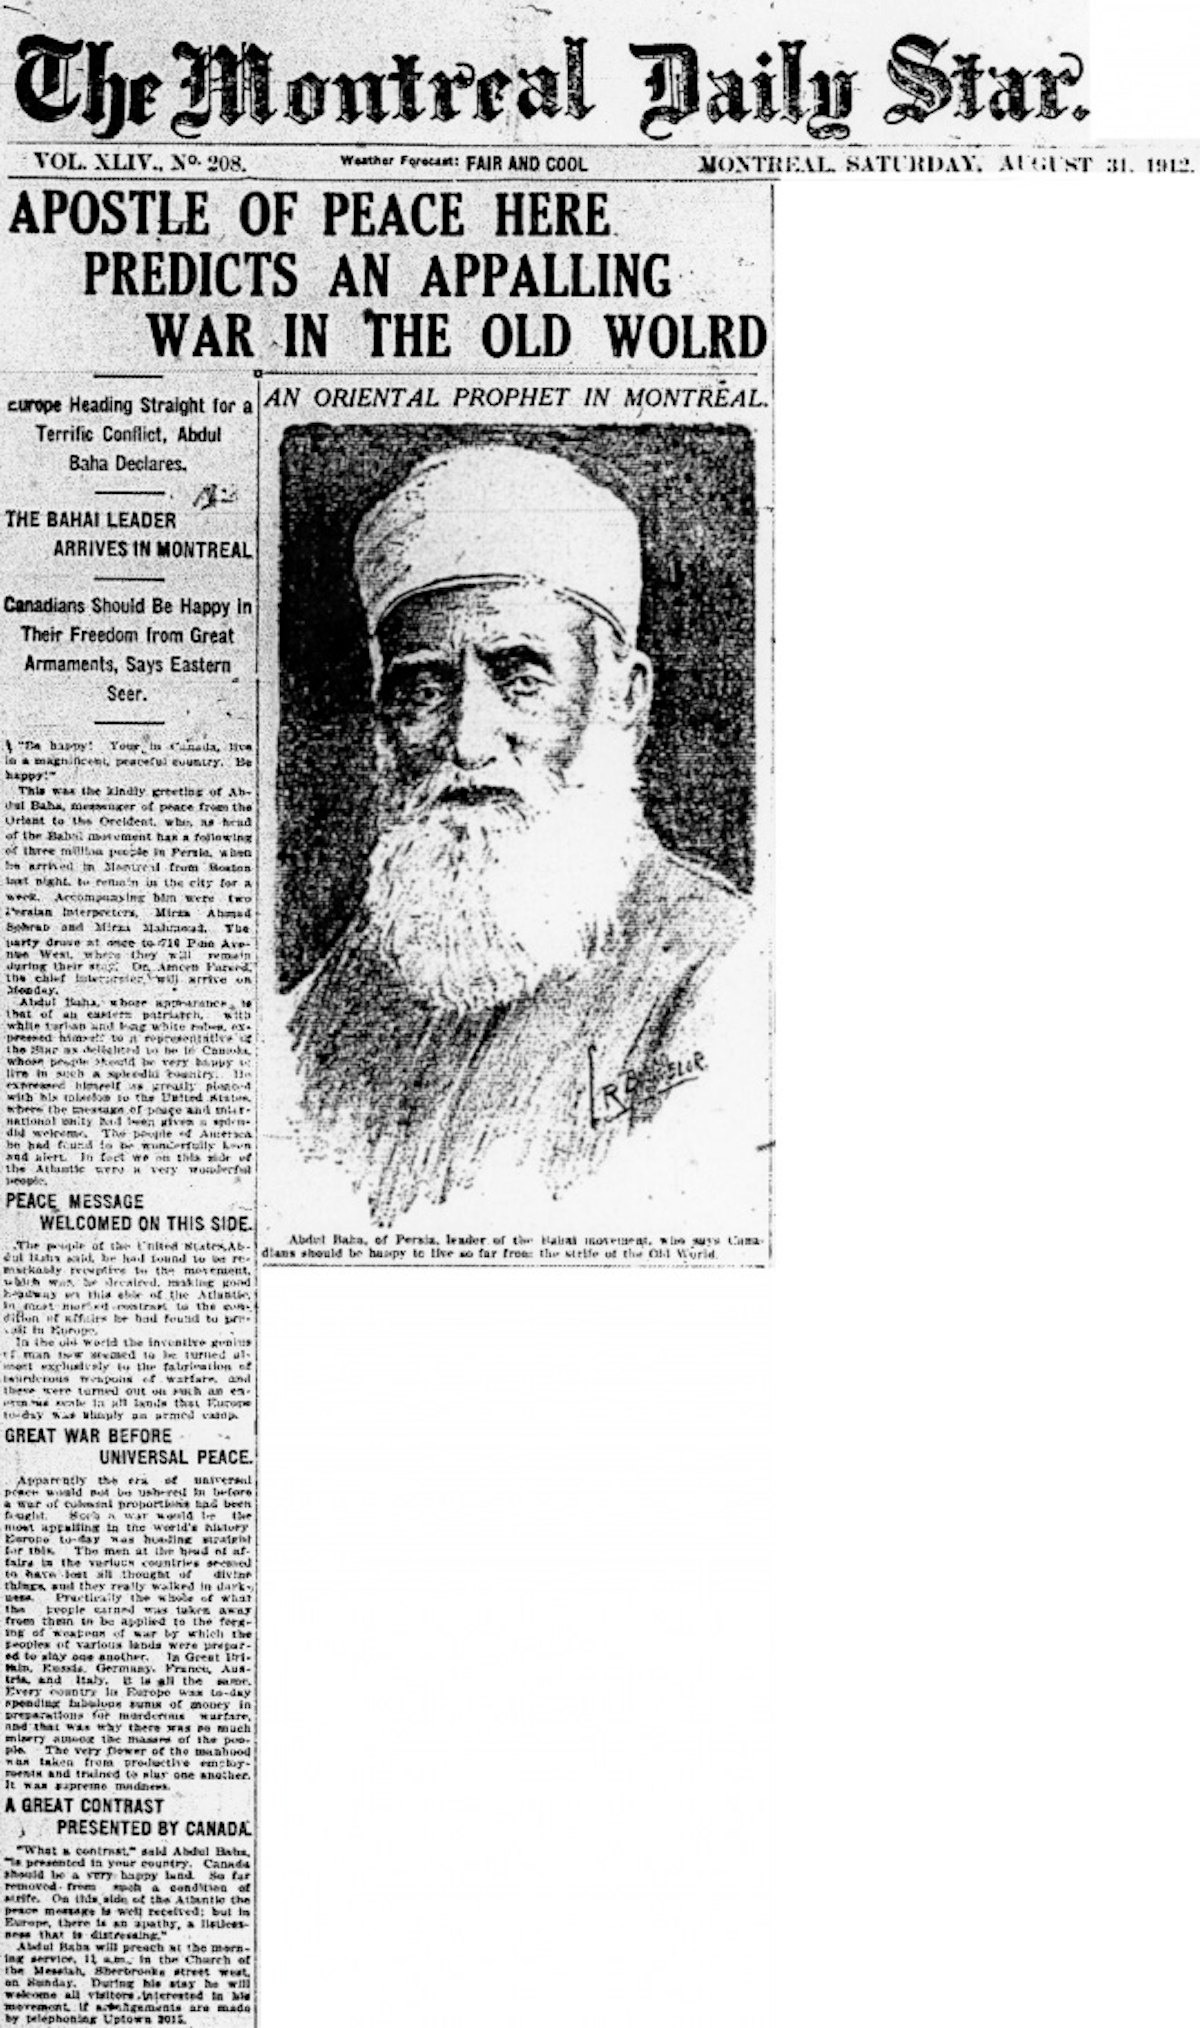 The 31 August 1912 issue of The Montreal Daily Star includes a prominent article about ‘Abdu’l-Baha’s talk the night before. “Apparently the era of universal peace would not be ushered in before a war of colossal proportions had been fought. Such a war would be the most appalling in the world’s history. Europe to-day was heading straight for this,” the newspaper quoted ‘Abdu’l-Baha as saying.